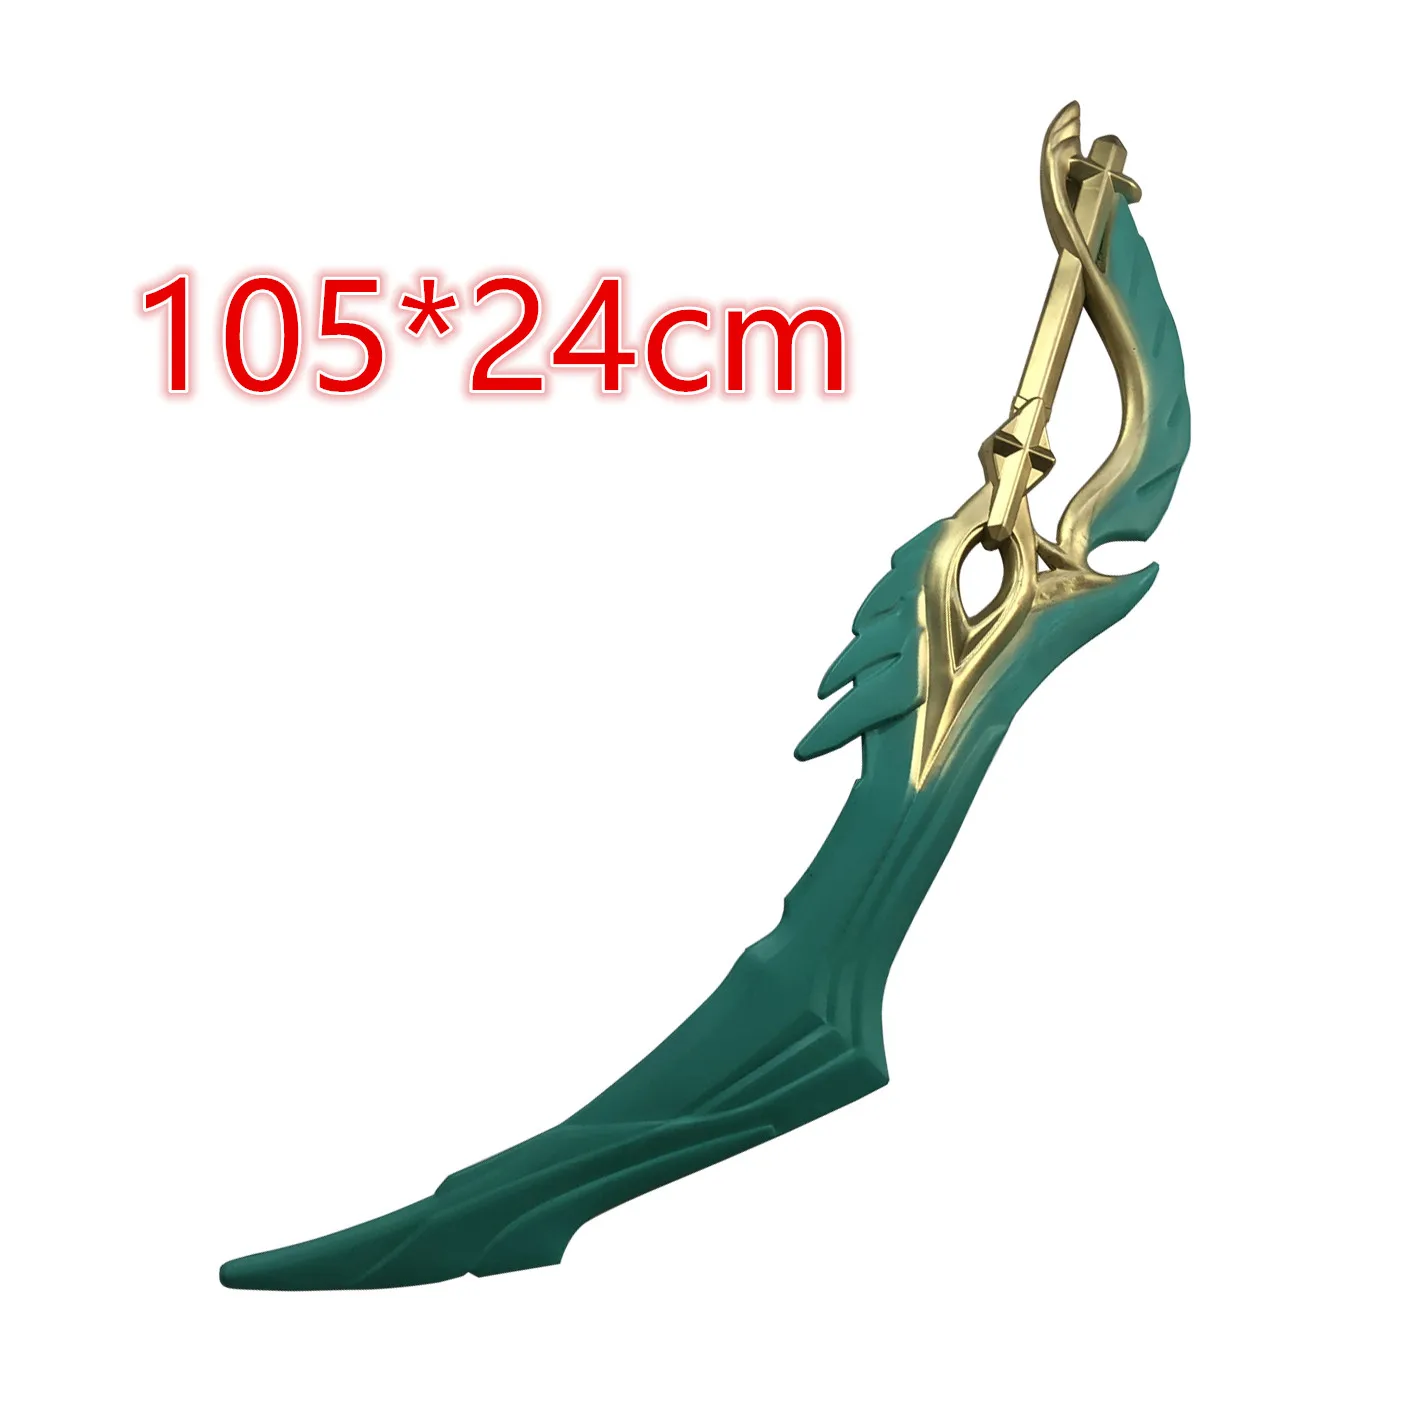 Big Knife The King Sword Game Sword Cosplay Weapon Props 1:1 Safety PU Role Gift Halloween Gift Kid Adult 105cm